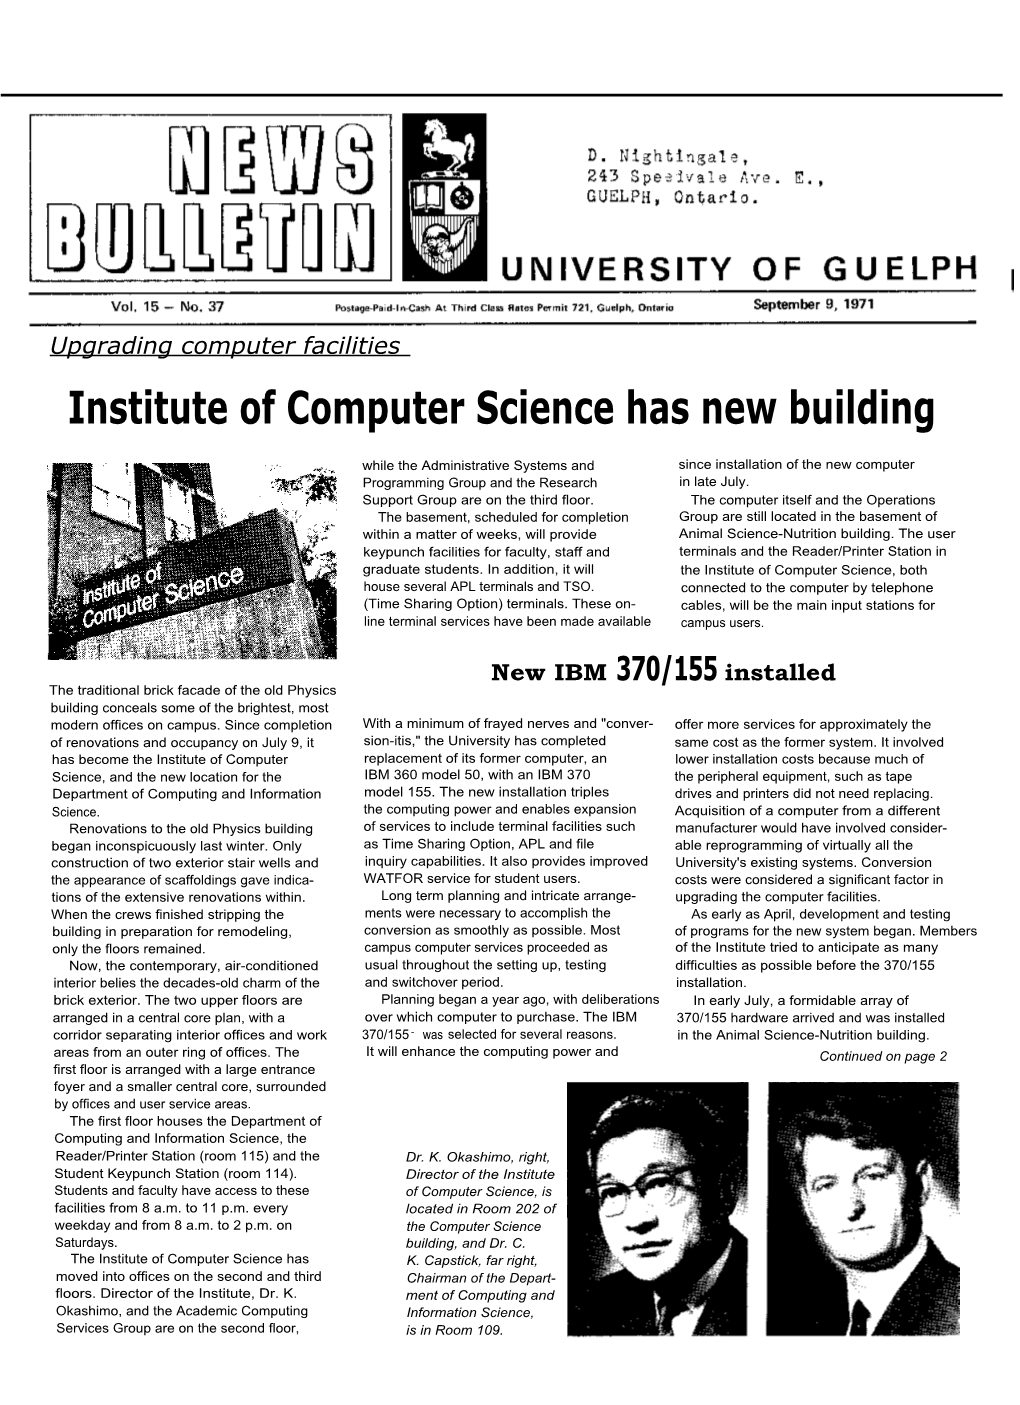 Institute of Computer Science Has New Building